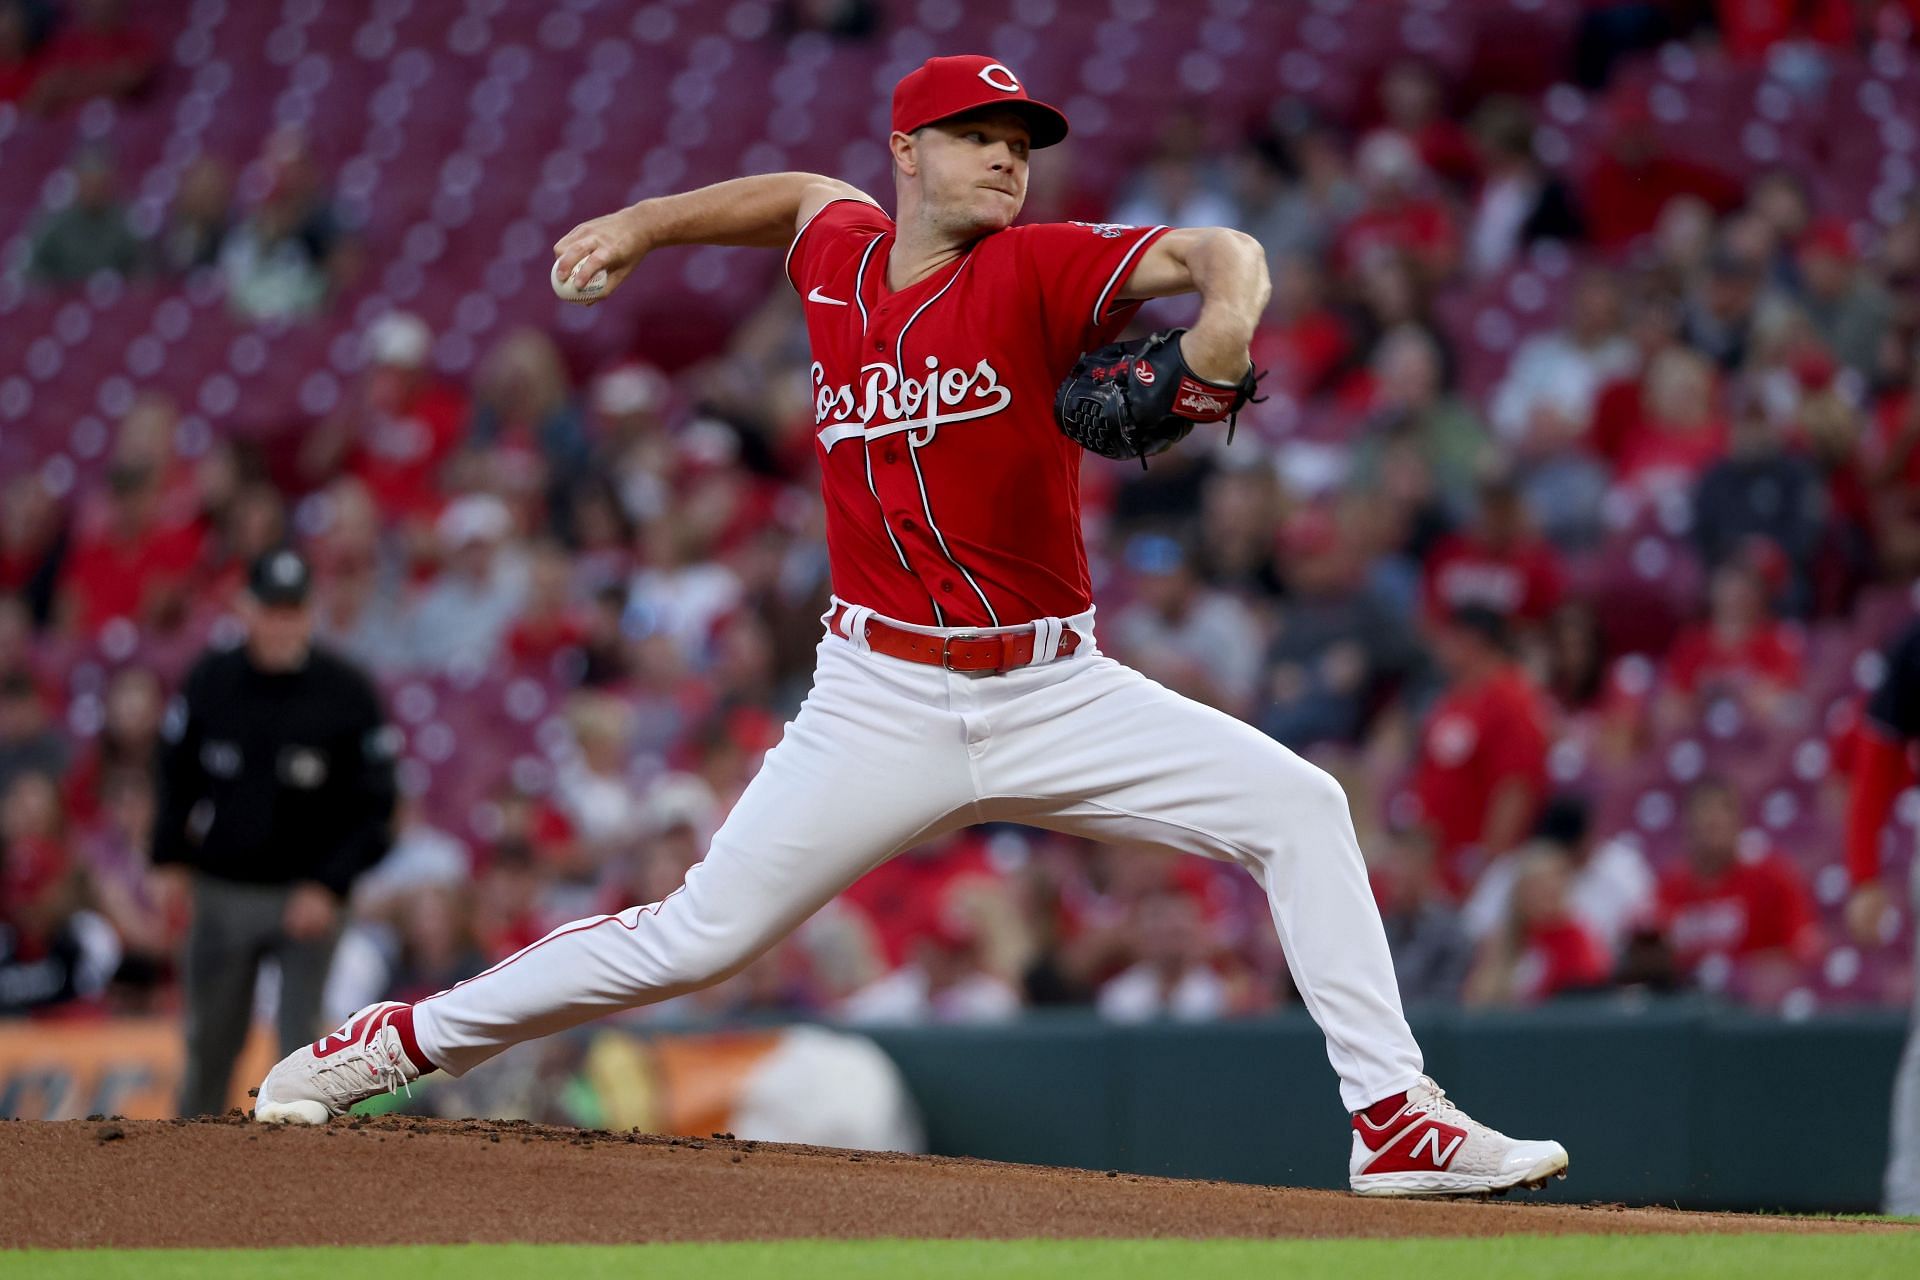 The Twins acquired Sonny Gray in a trade with the Reds